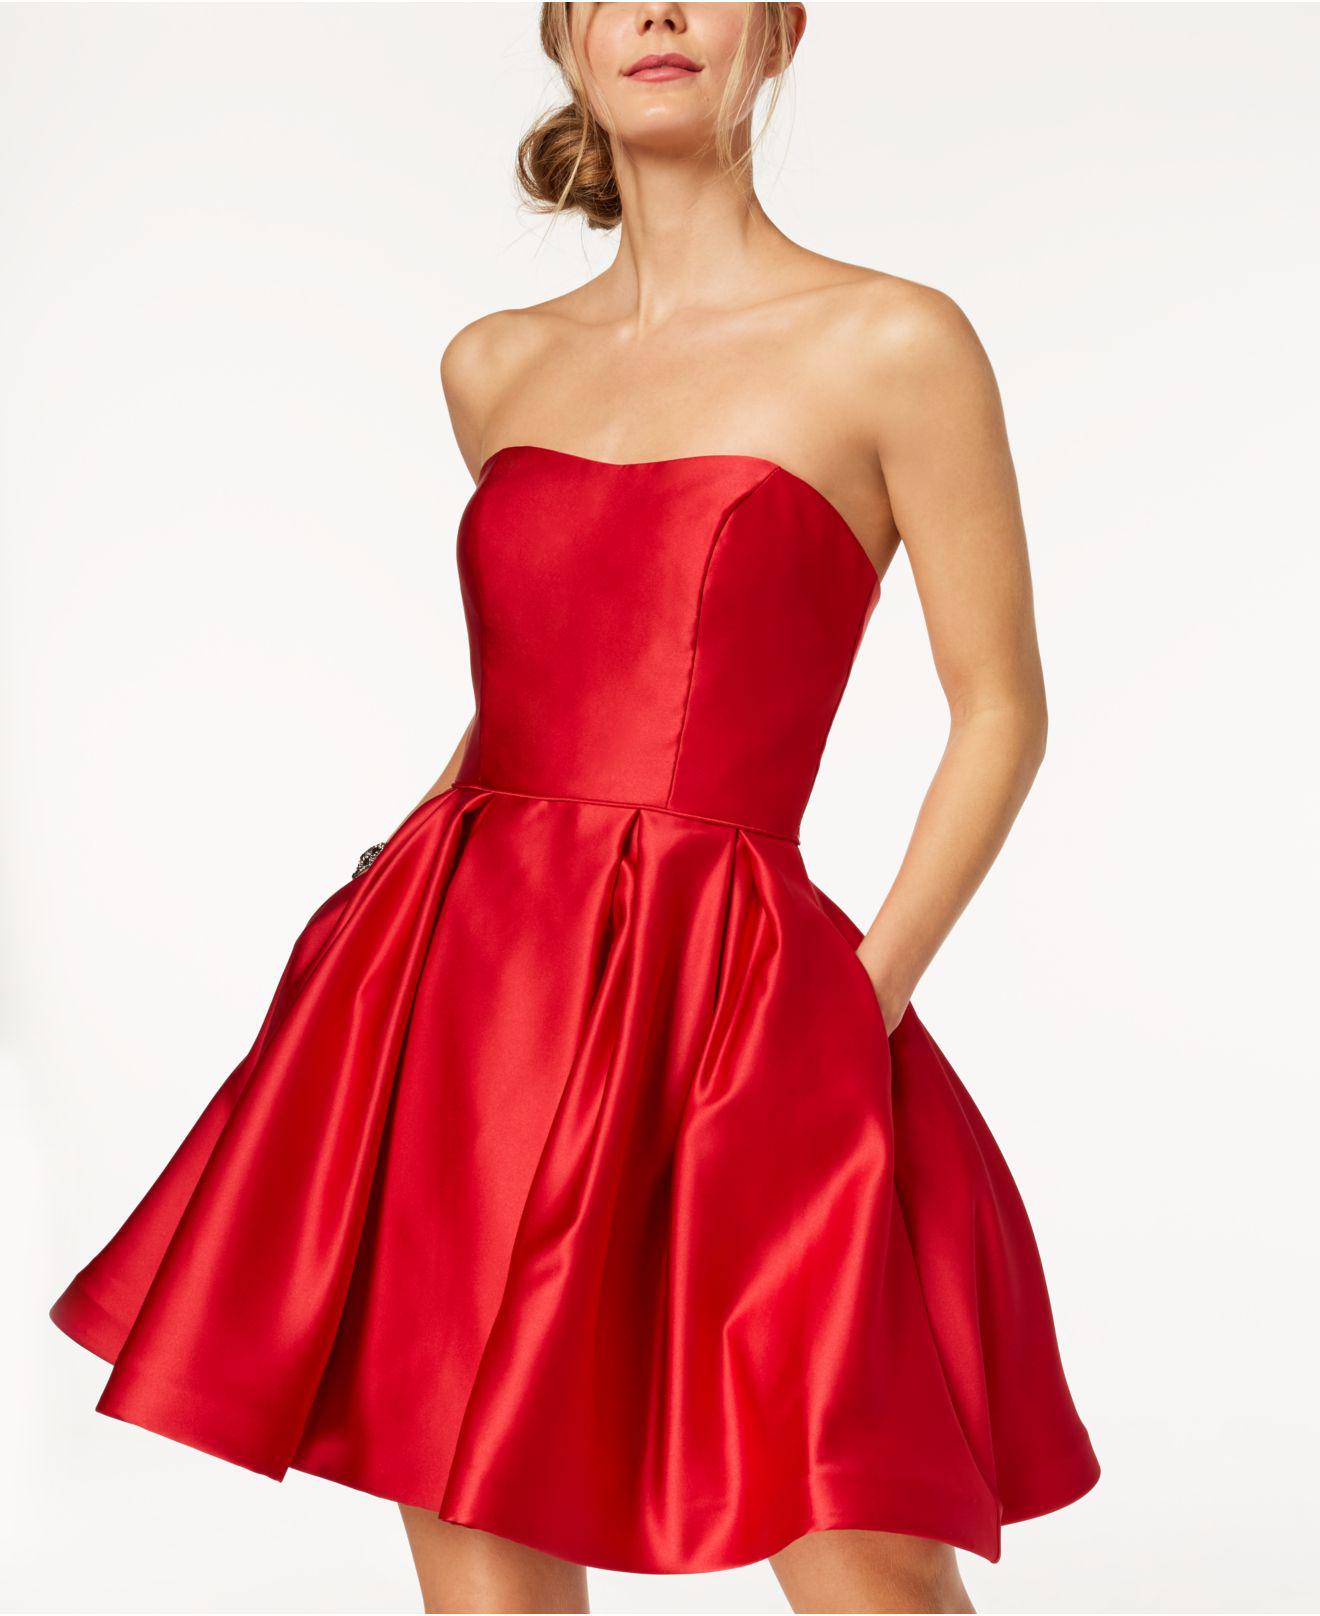 ILLI LONDON Women Fit and Flare Red Dress - Buy ILLI LONDON Women Fit and Flare  Red Dress Online at Best Prices in India | Flipkart.com